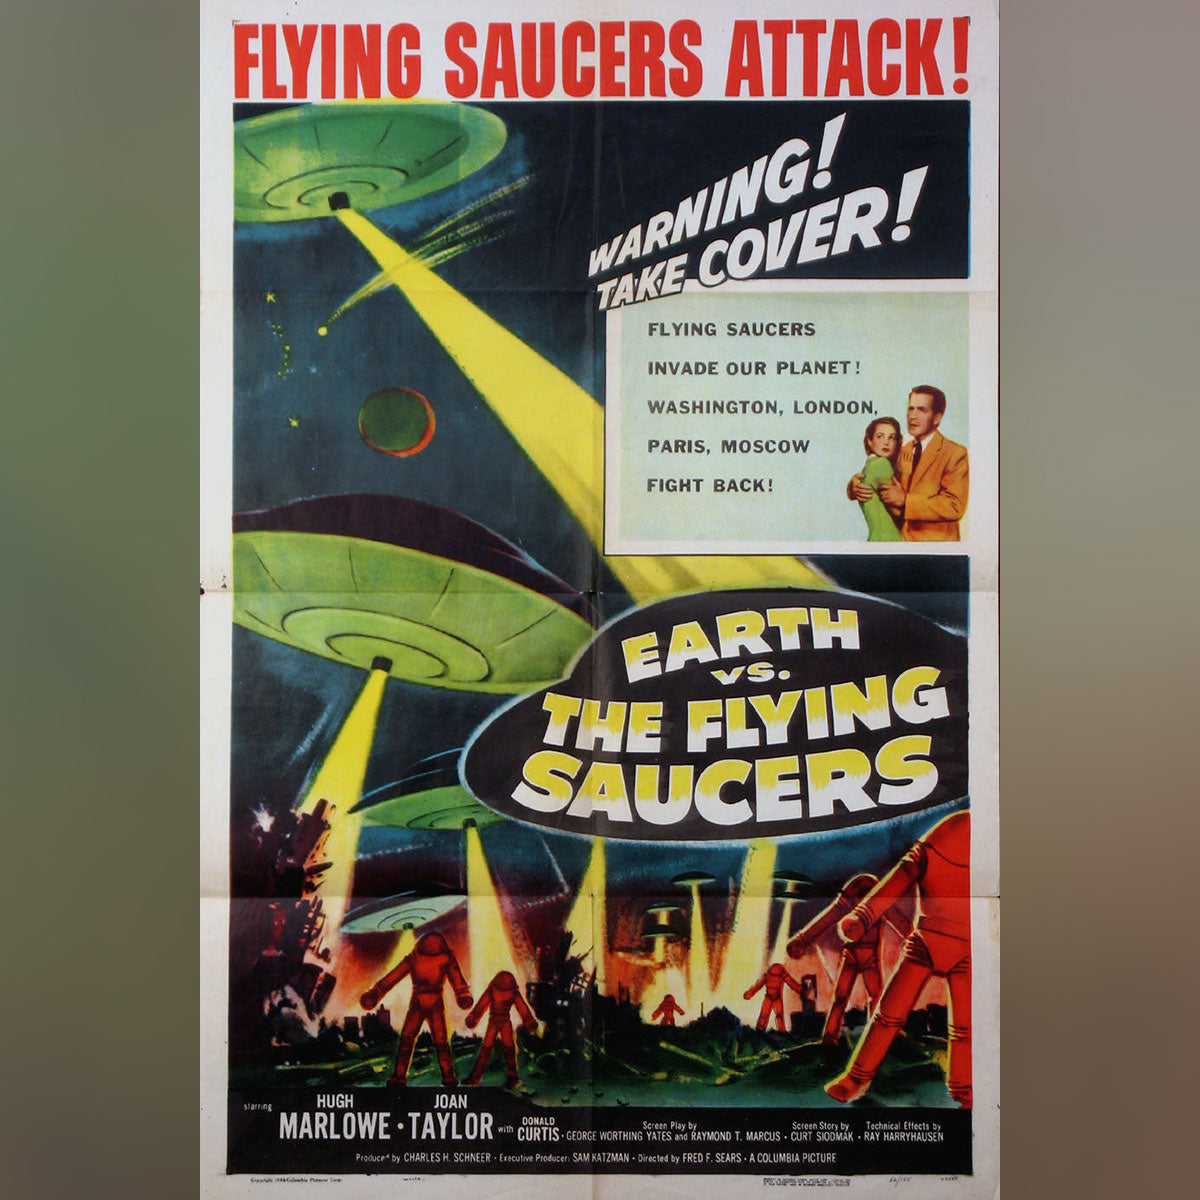 Original Movie Poster of Earth Vs. The Flying Saucers (1956)